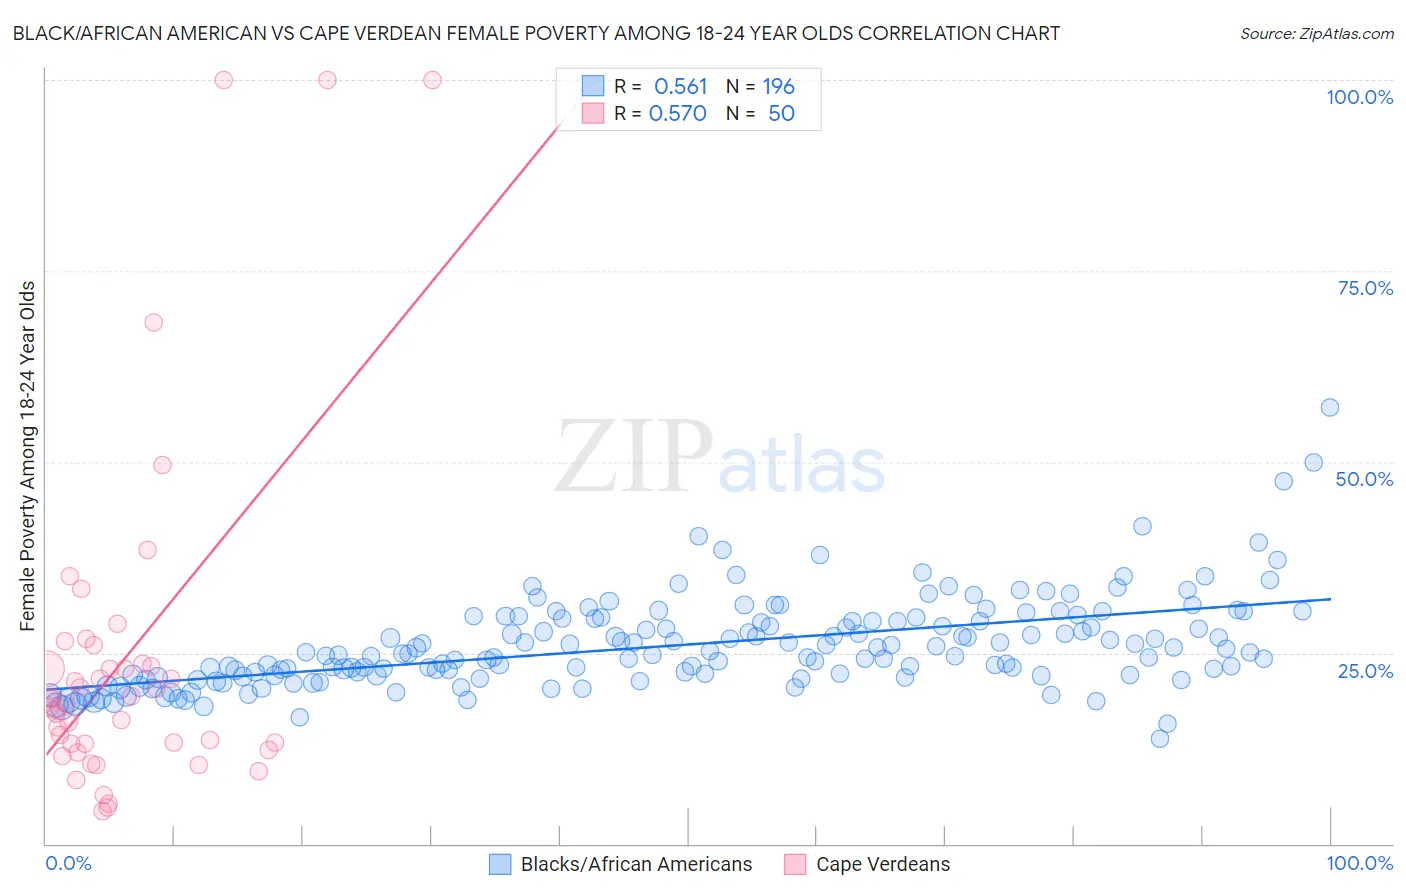 Black/African American vs Cape Verdean Female Poverty Among 18-24 Year Olds